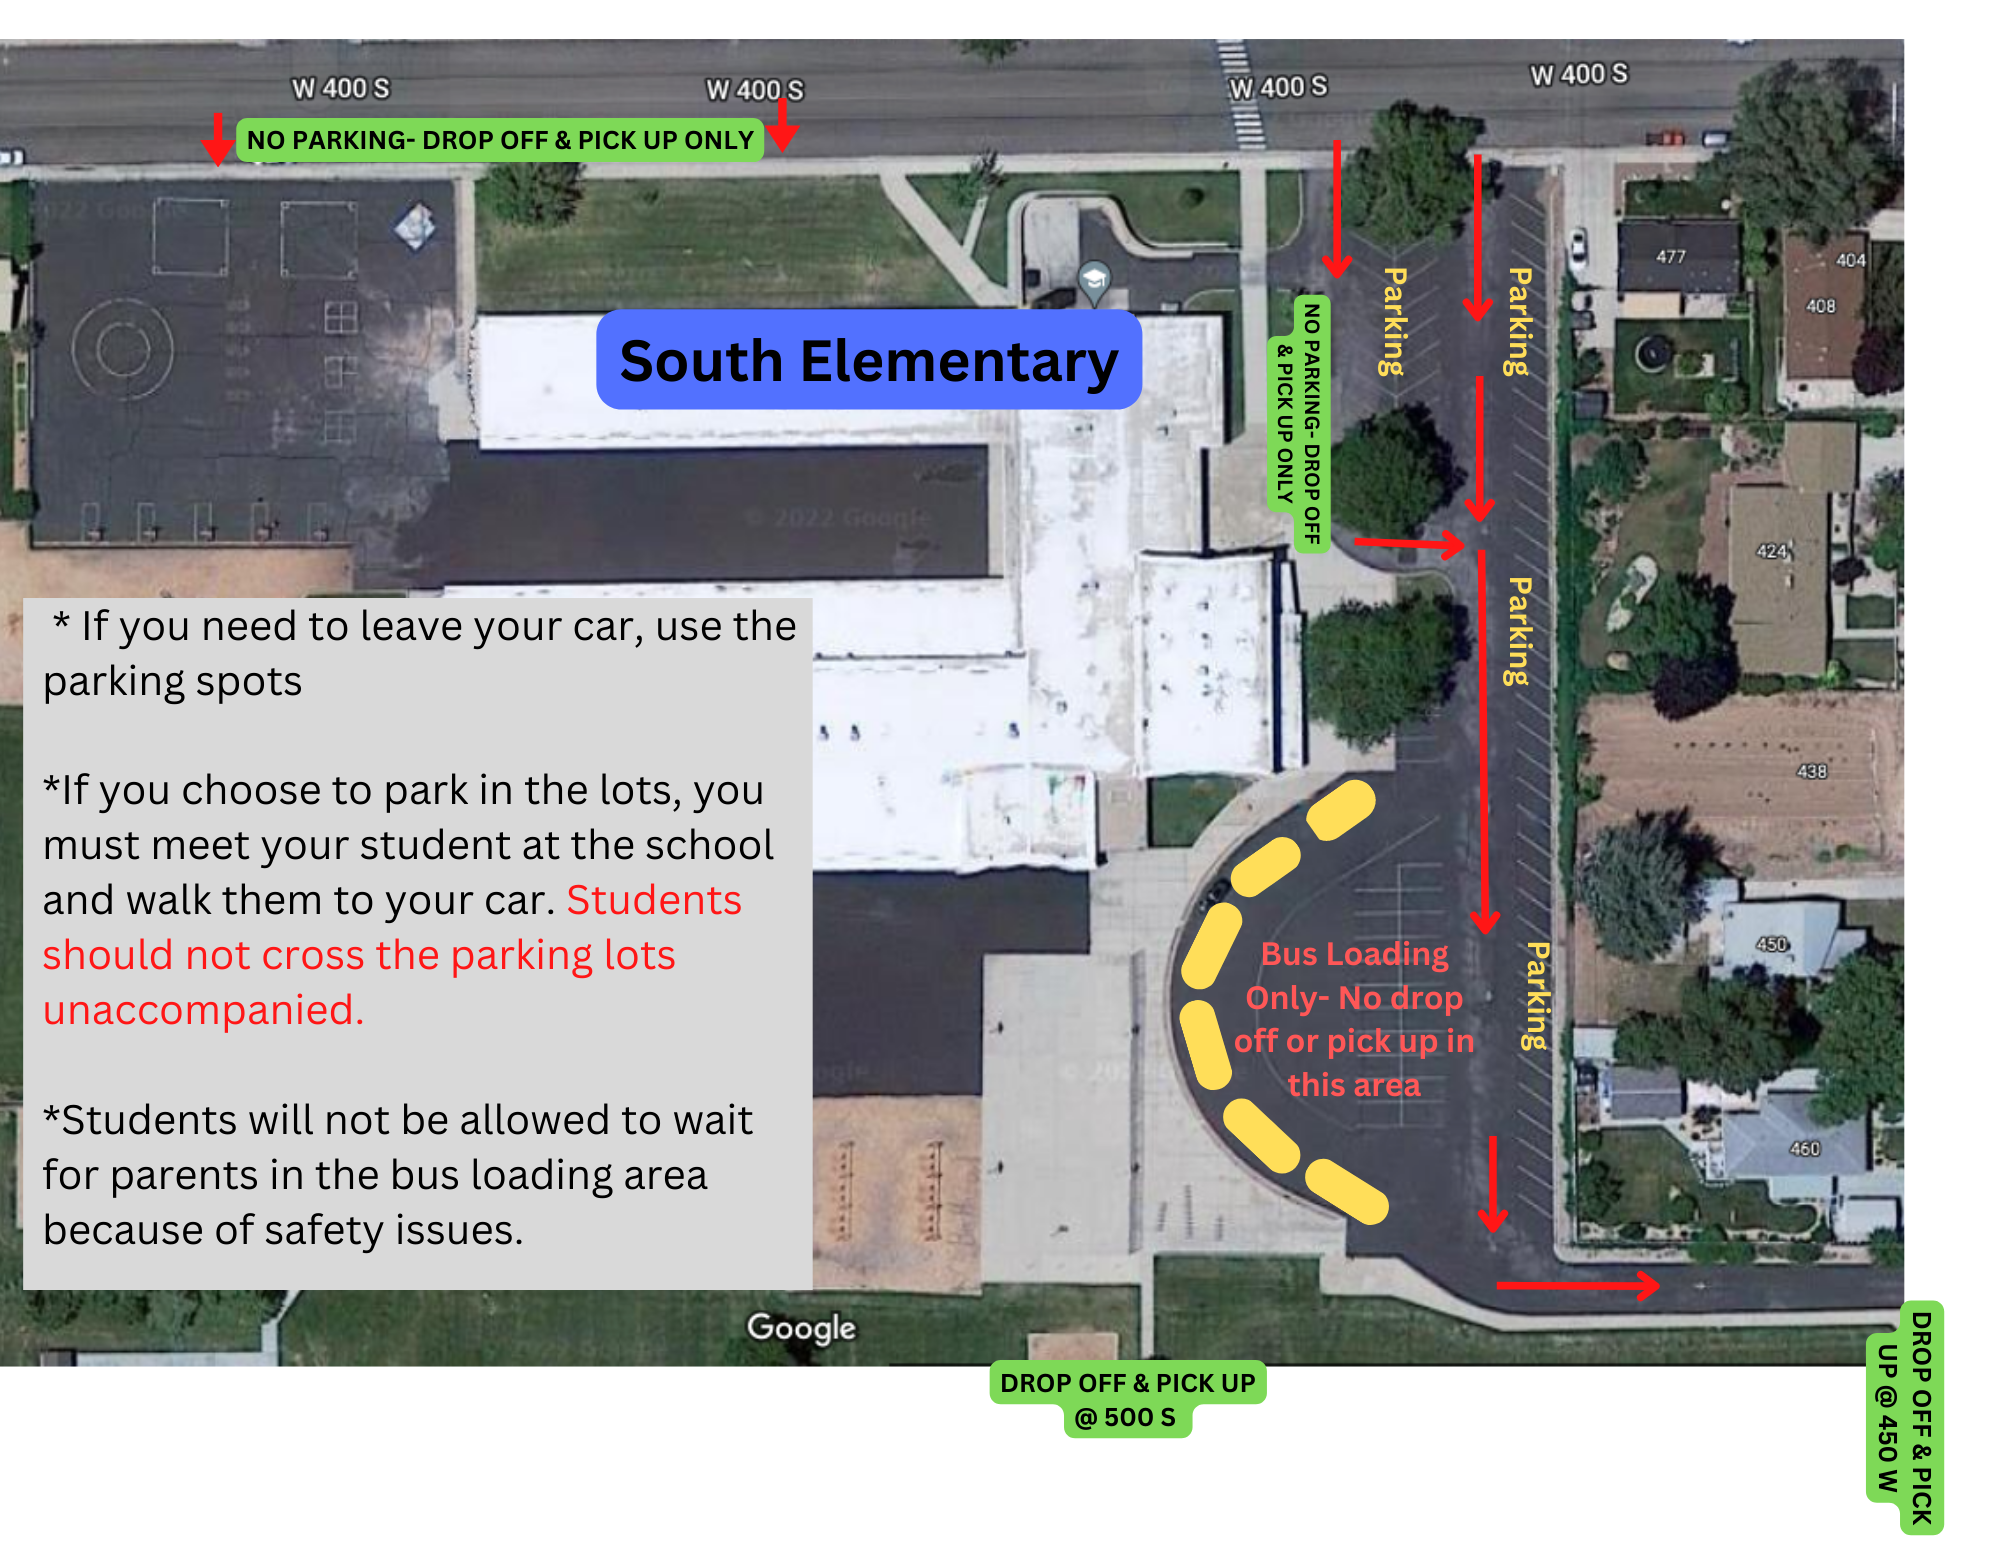 Map of south elementary with traffic flow and pick up zones